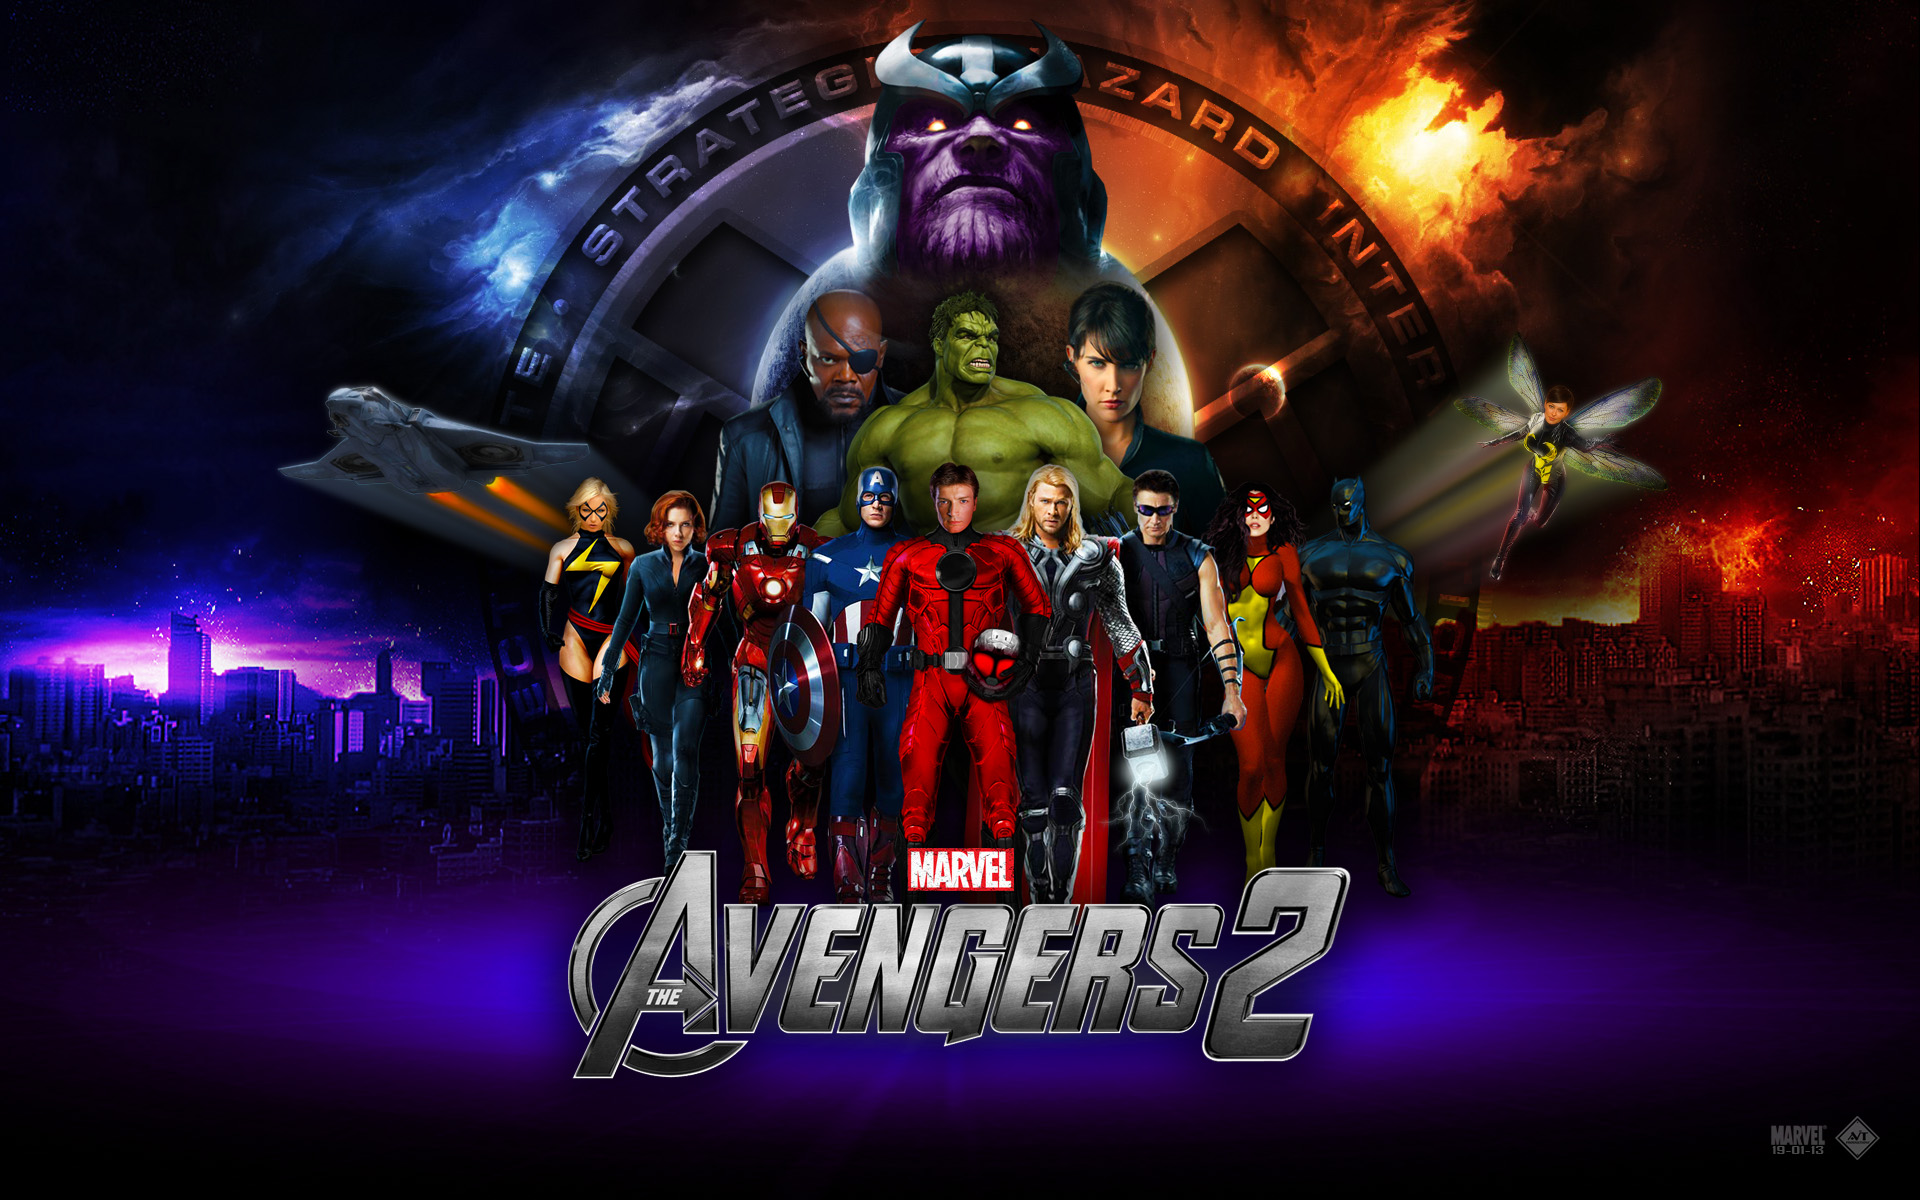 The Avengers download